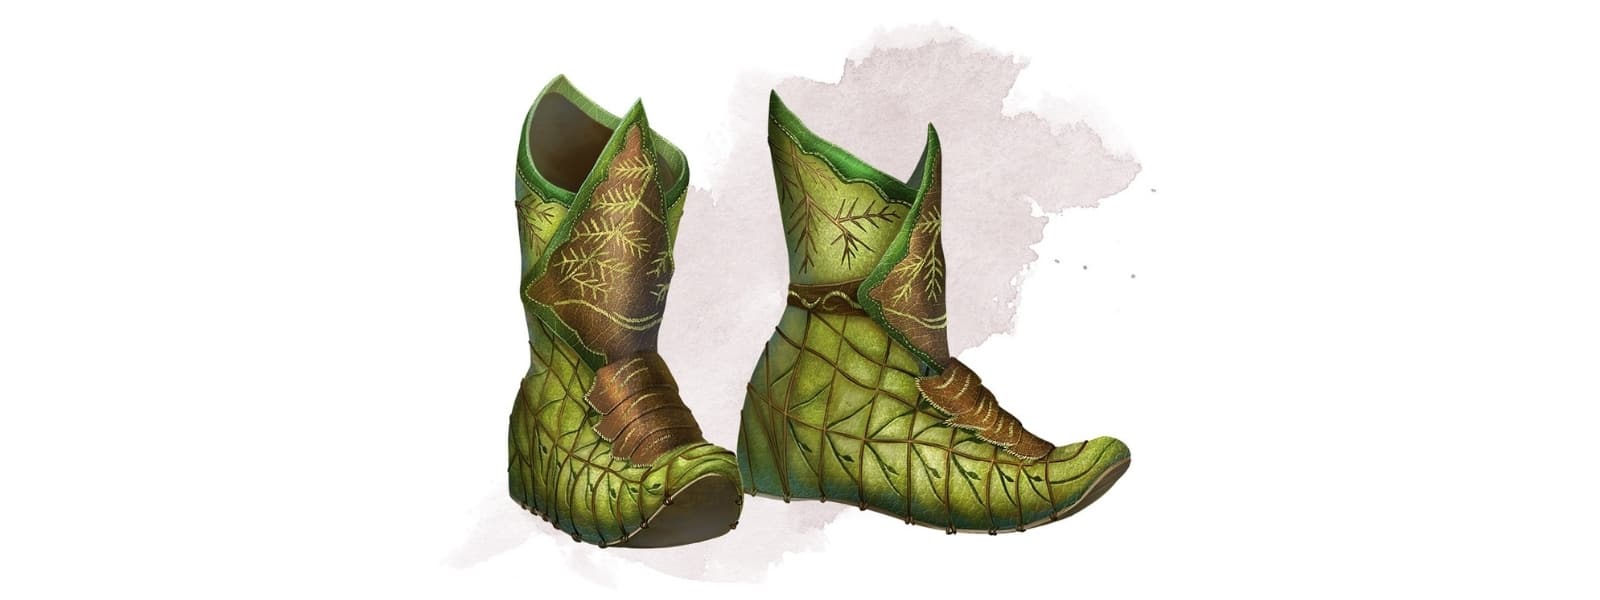 Boots of Elvenkind 5e